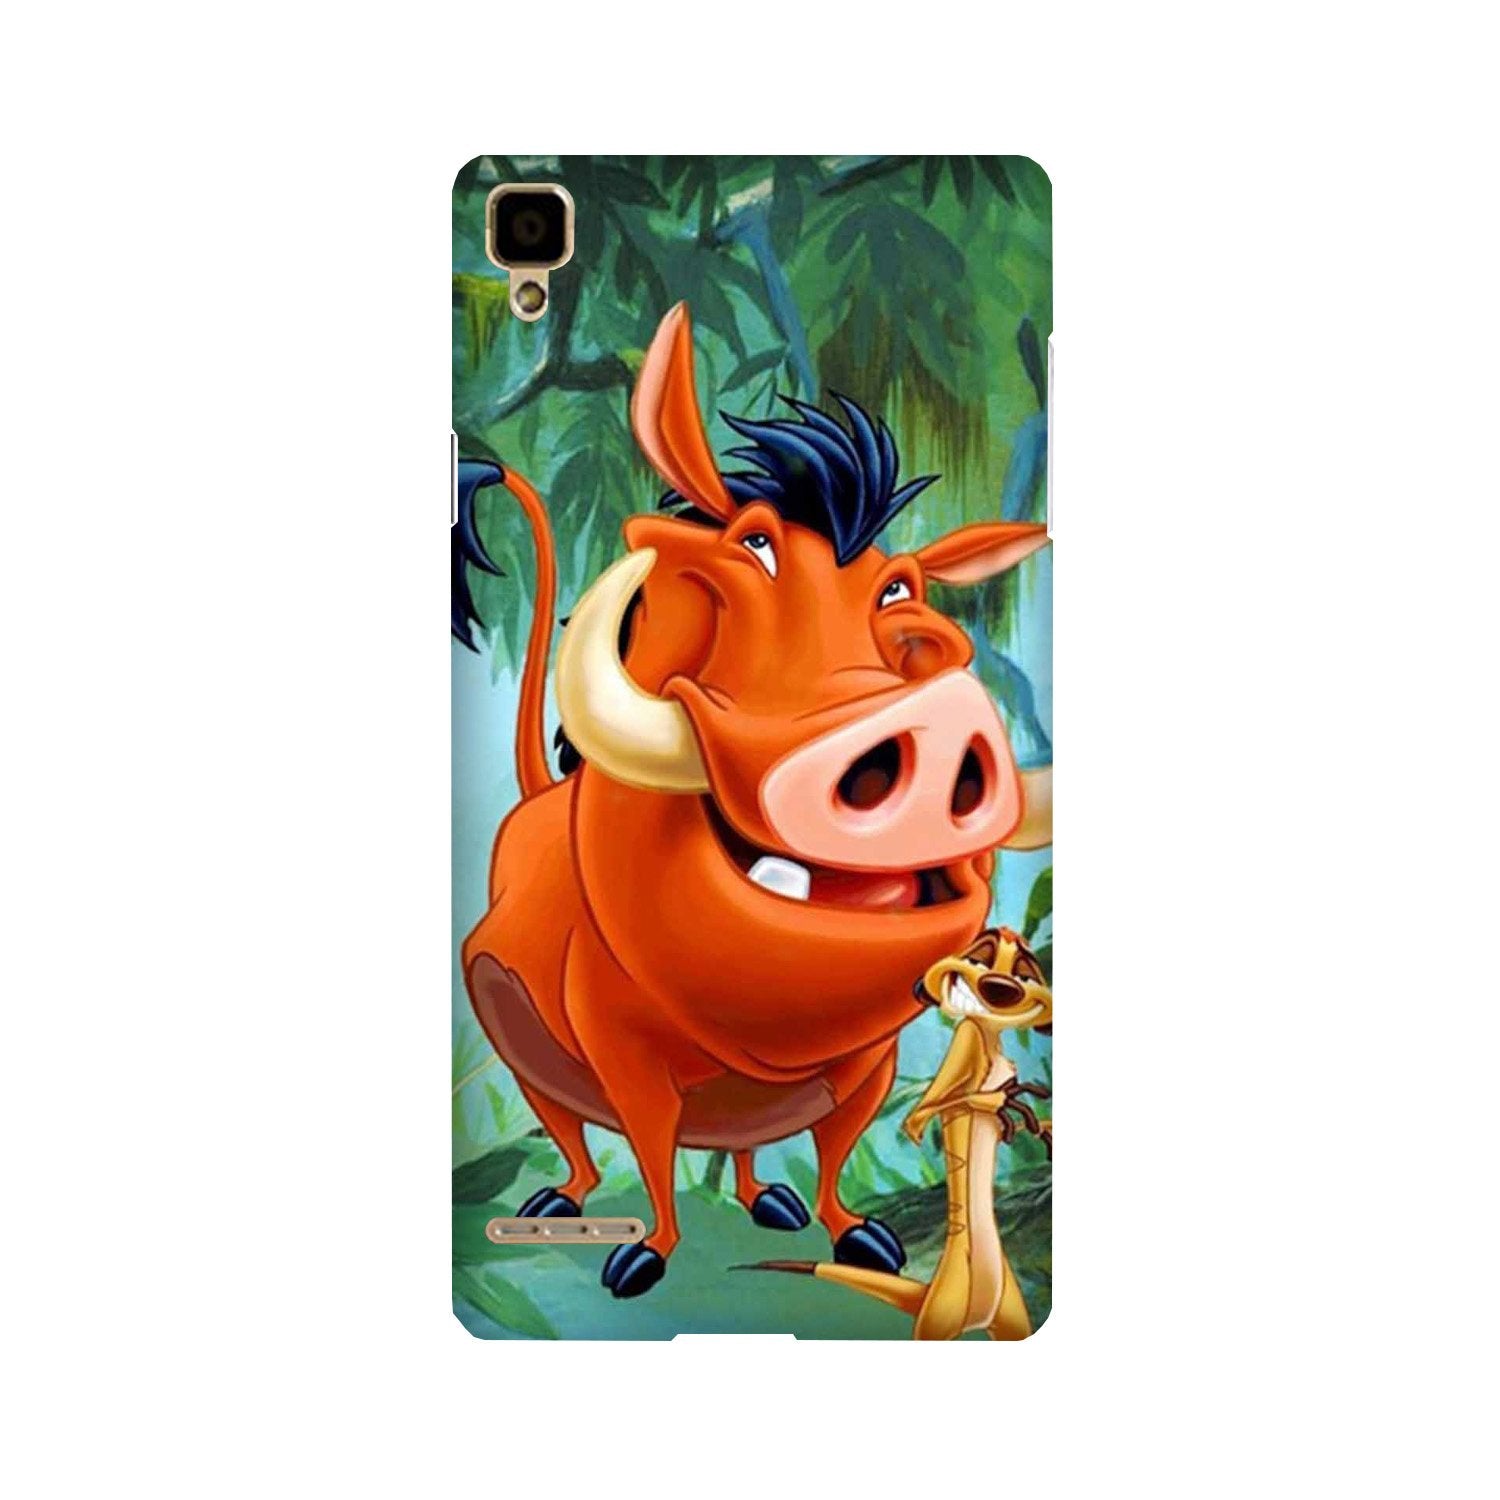 Timon and Pumbaa Mobile Back Case for Oppo F1  (Design - 305)